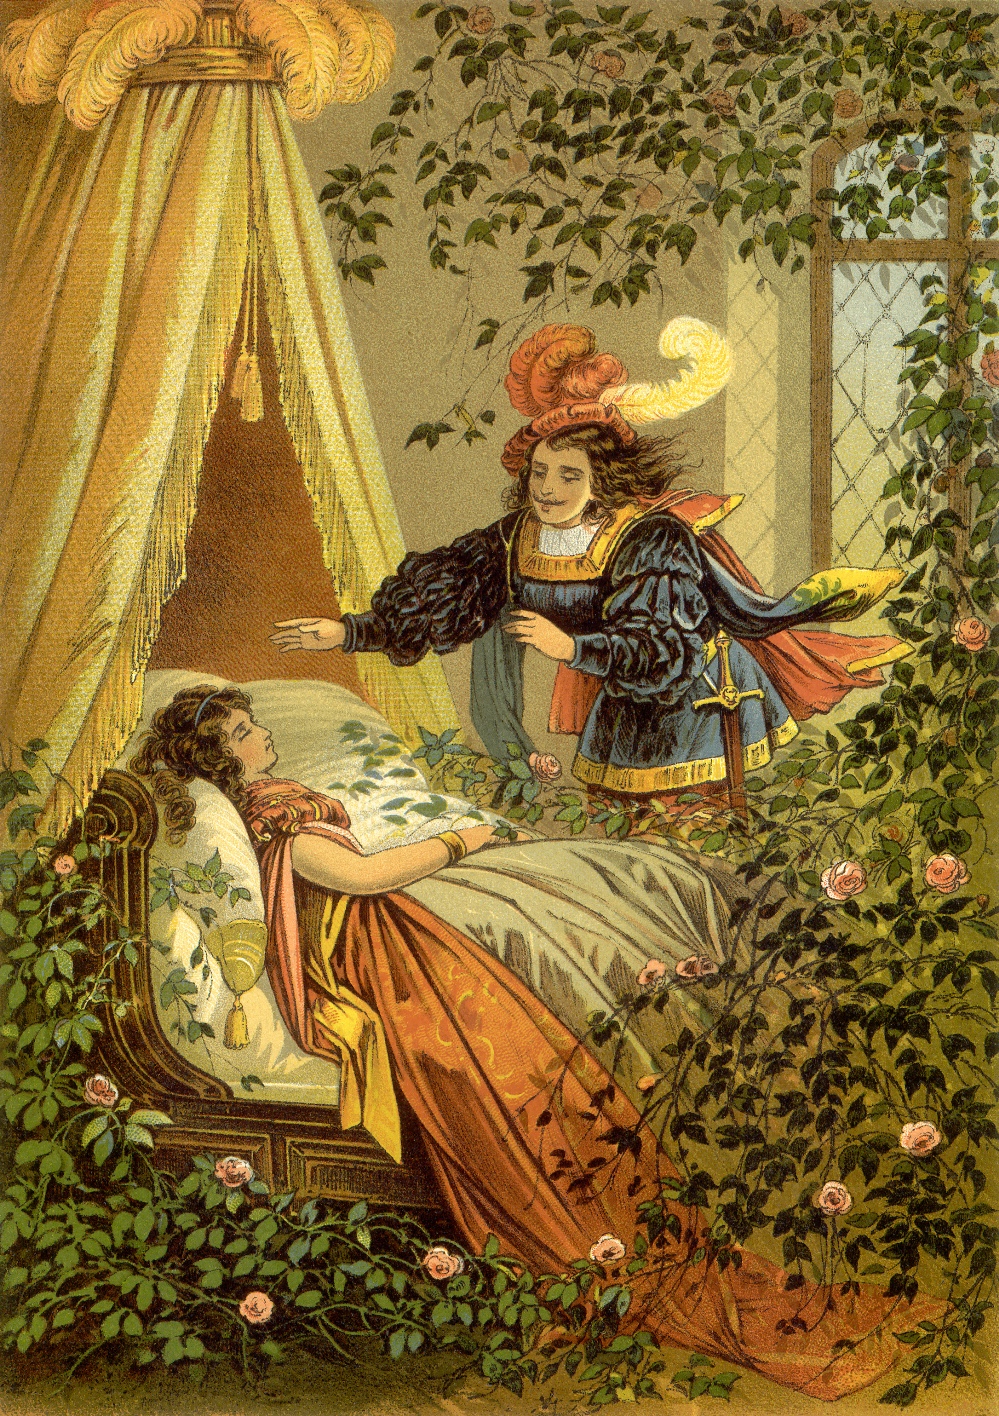 Unknown Artist - Sleeping Beauty And Prince Charming, c.1895